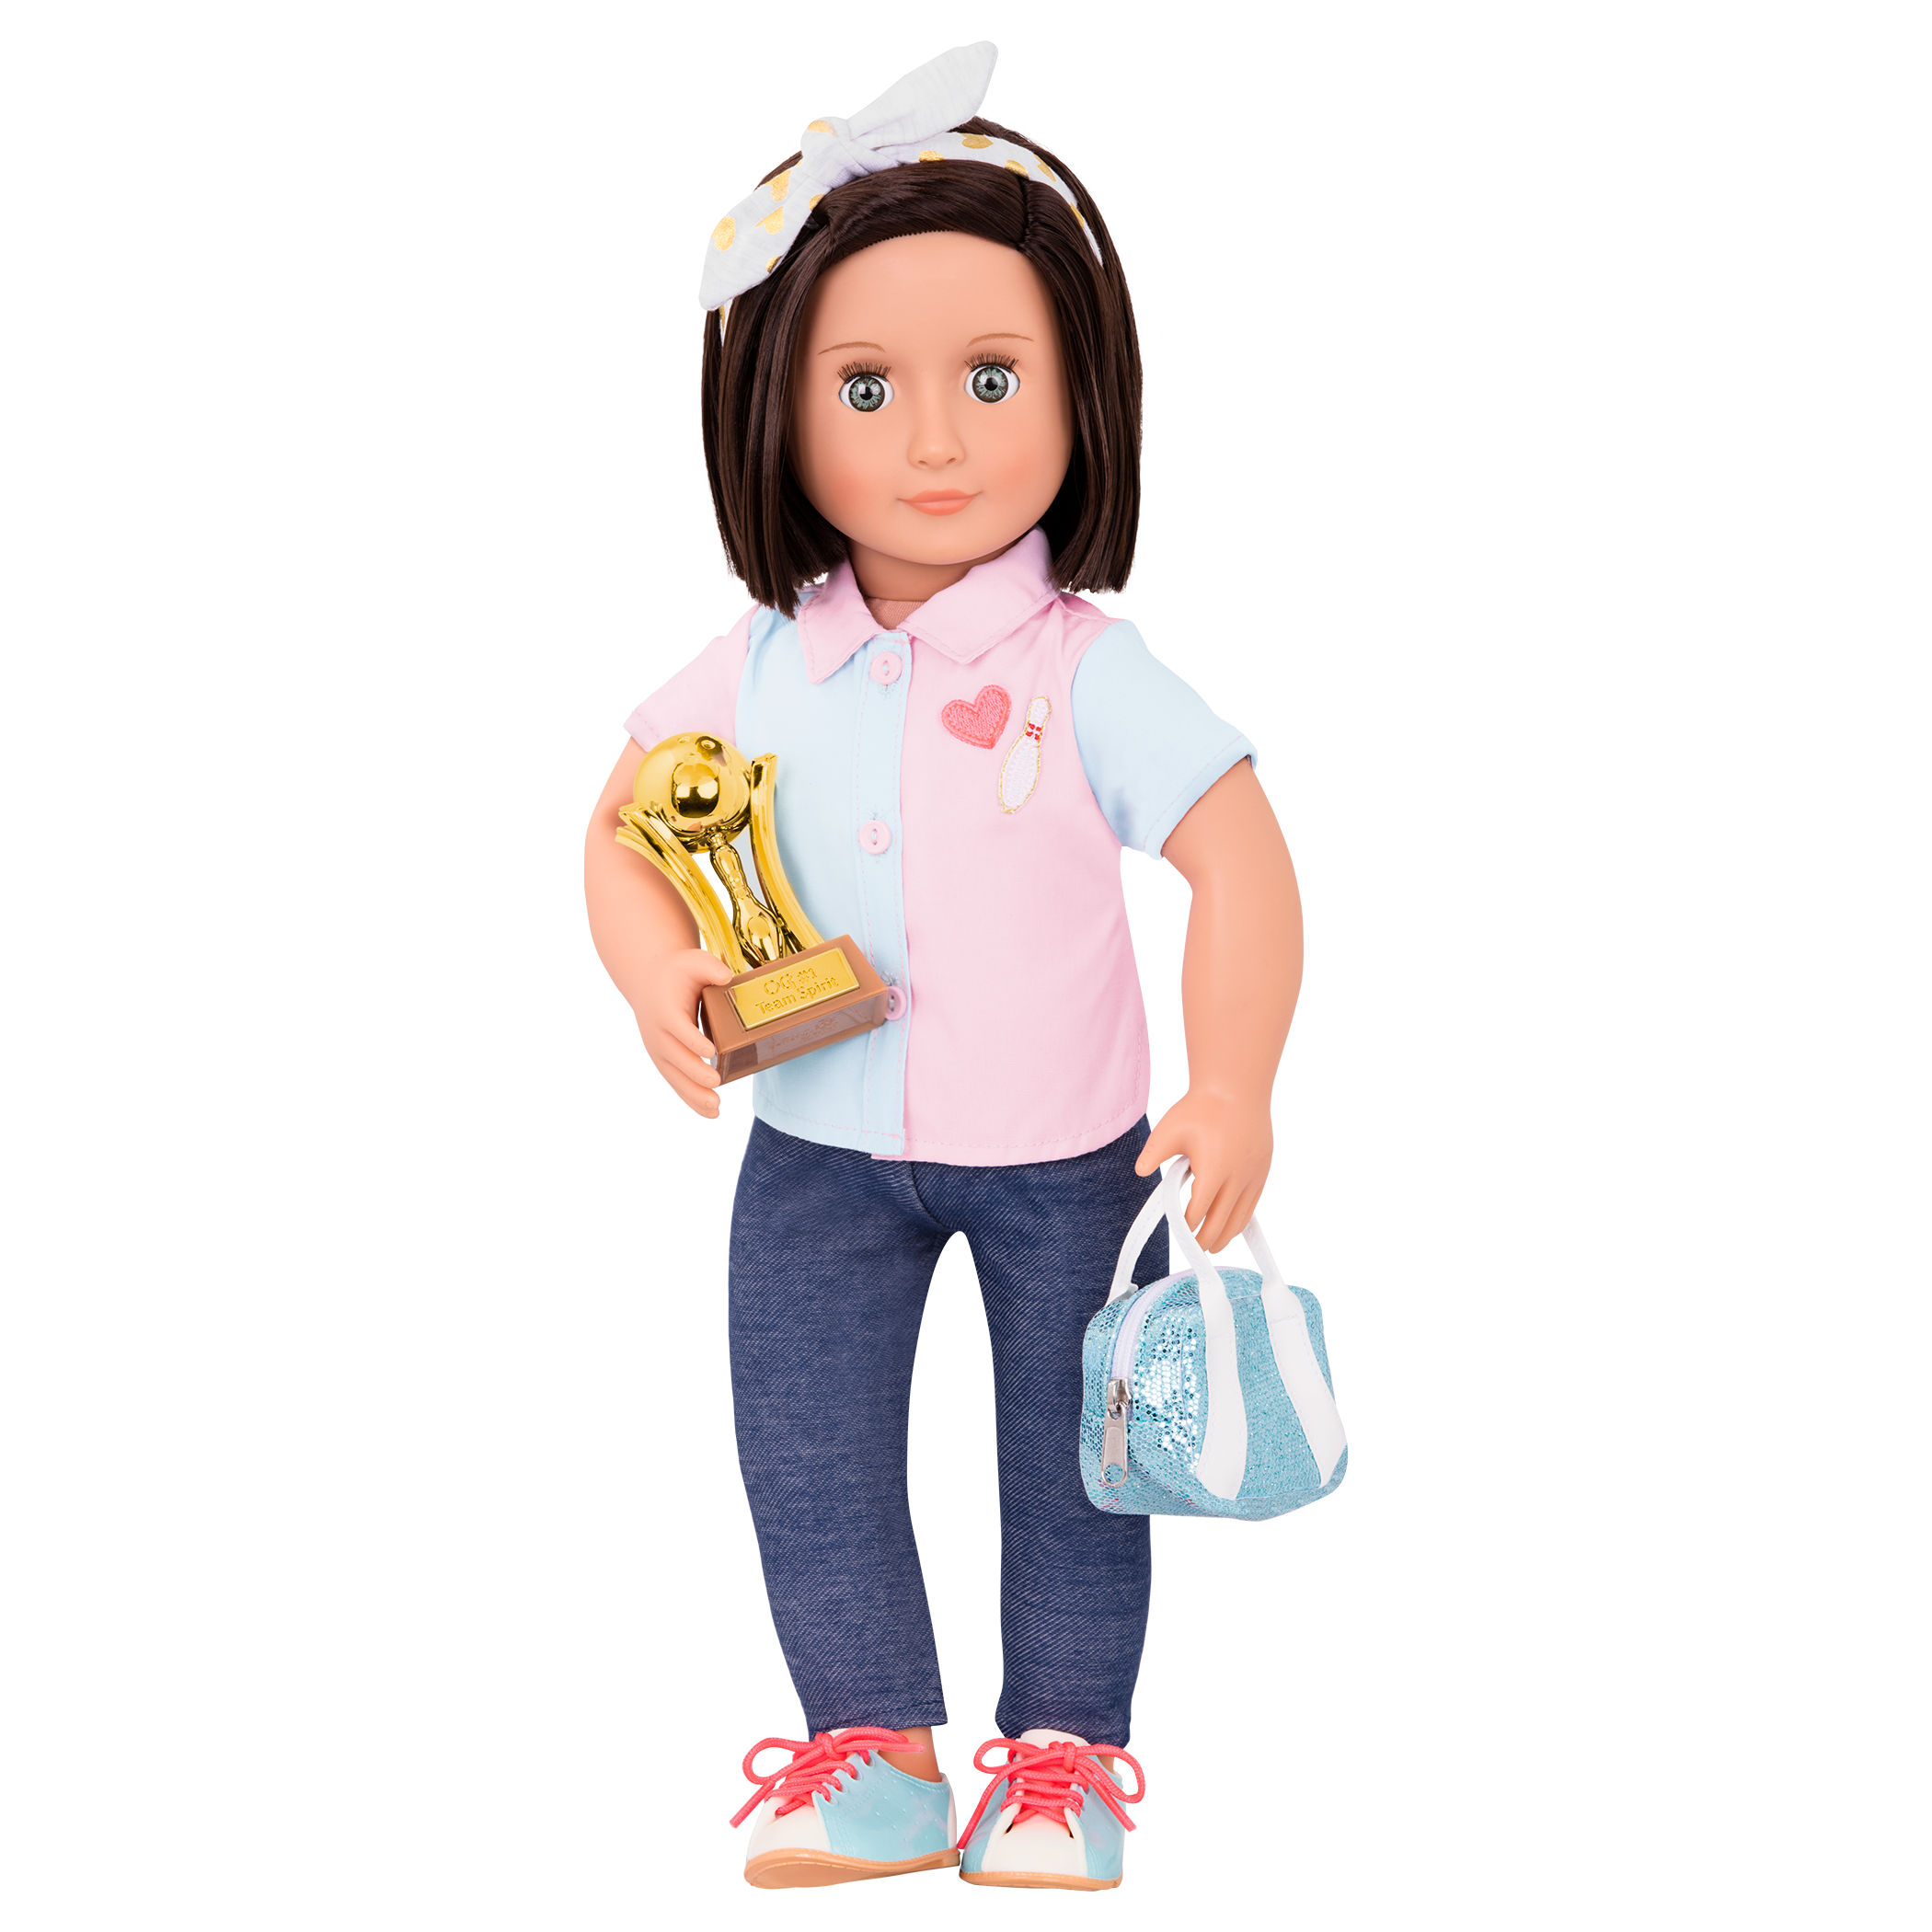 Everly Deluxe 18-inch Bowling Doll wearing uniform